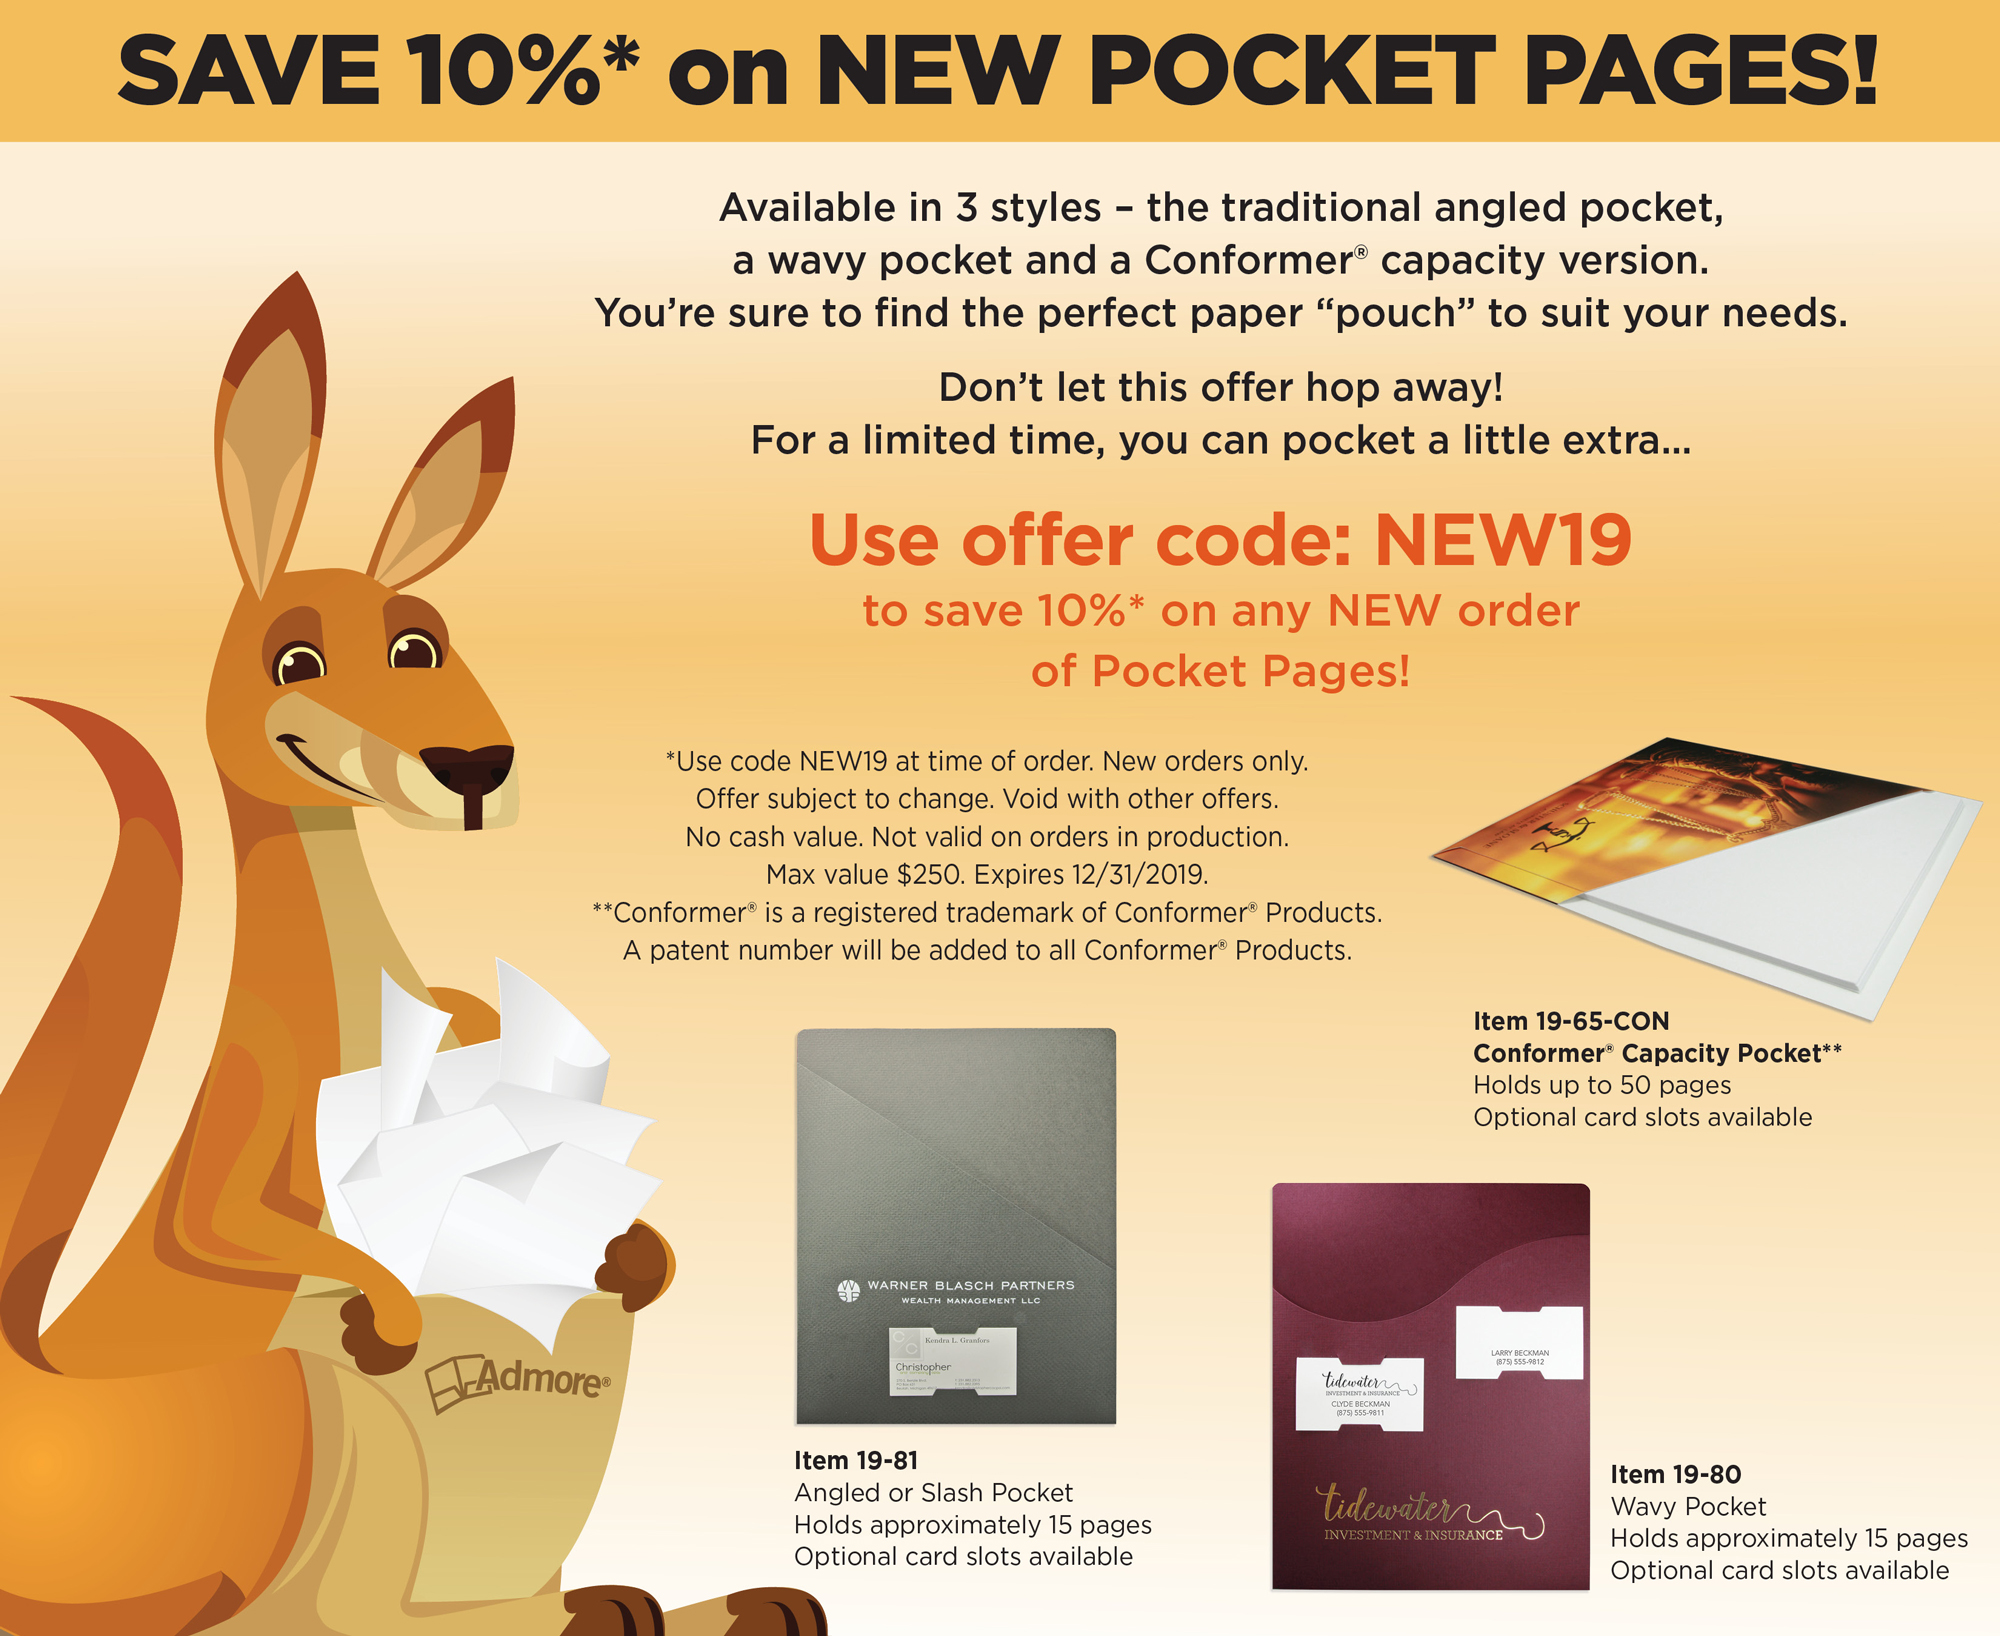 Pocket Pages